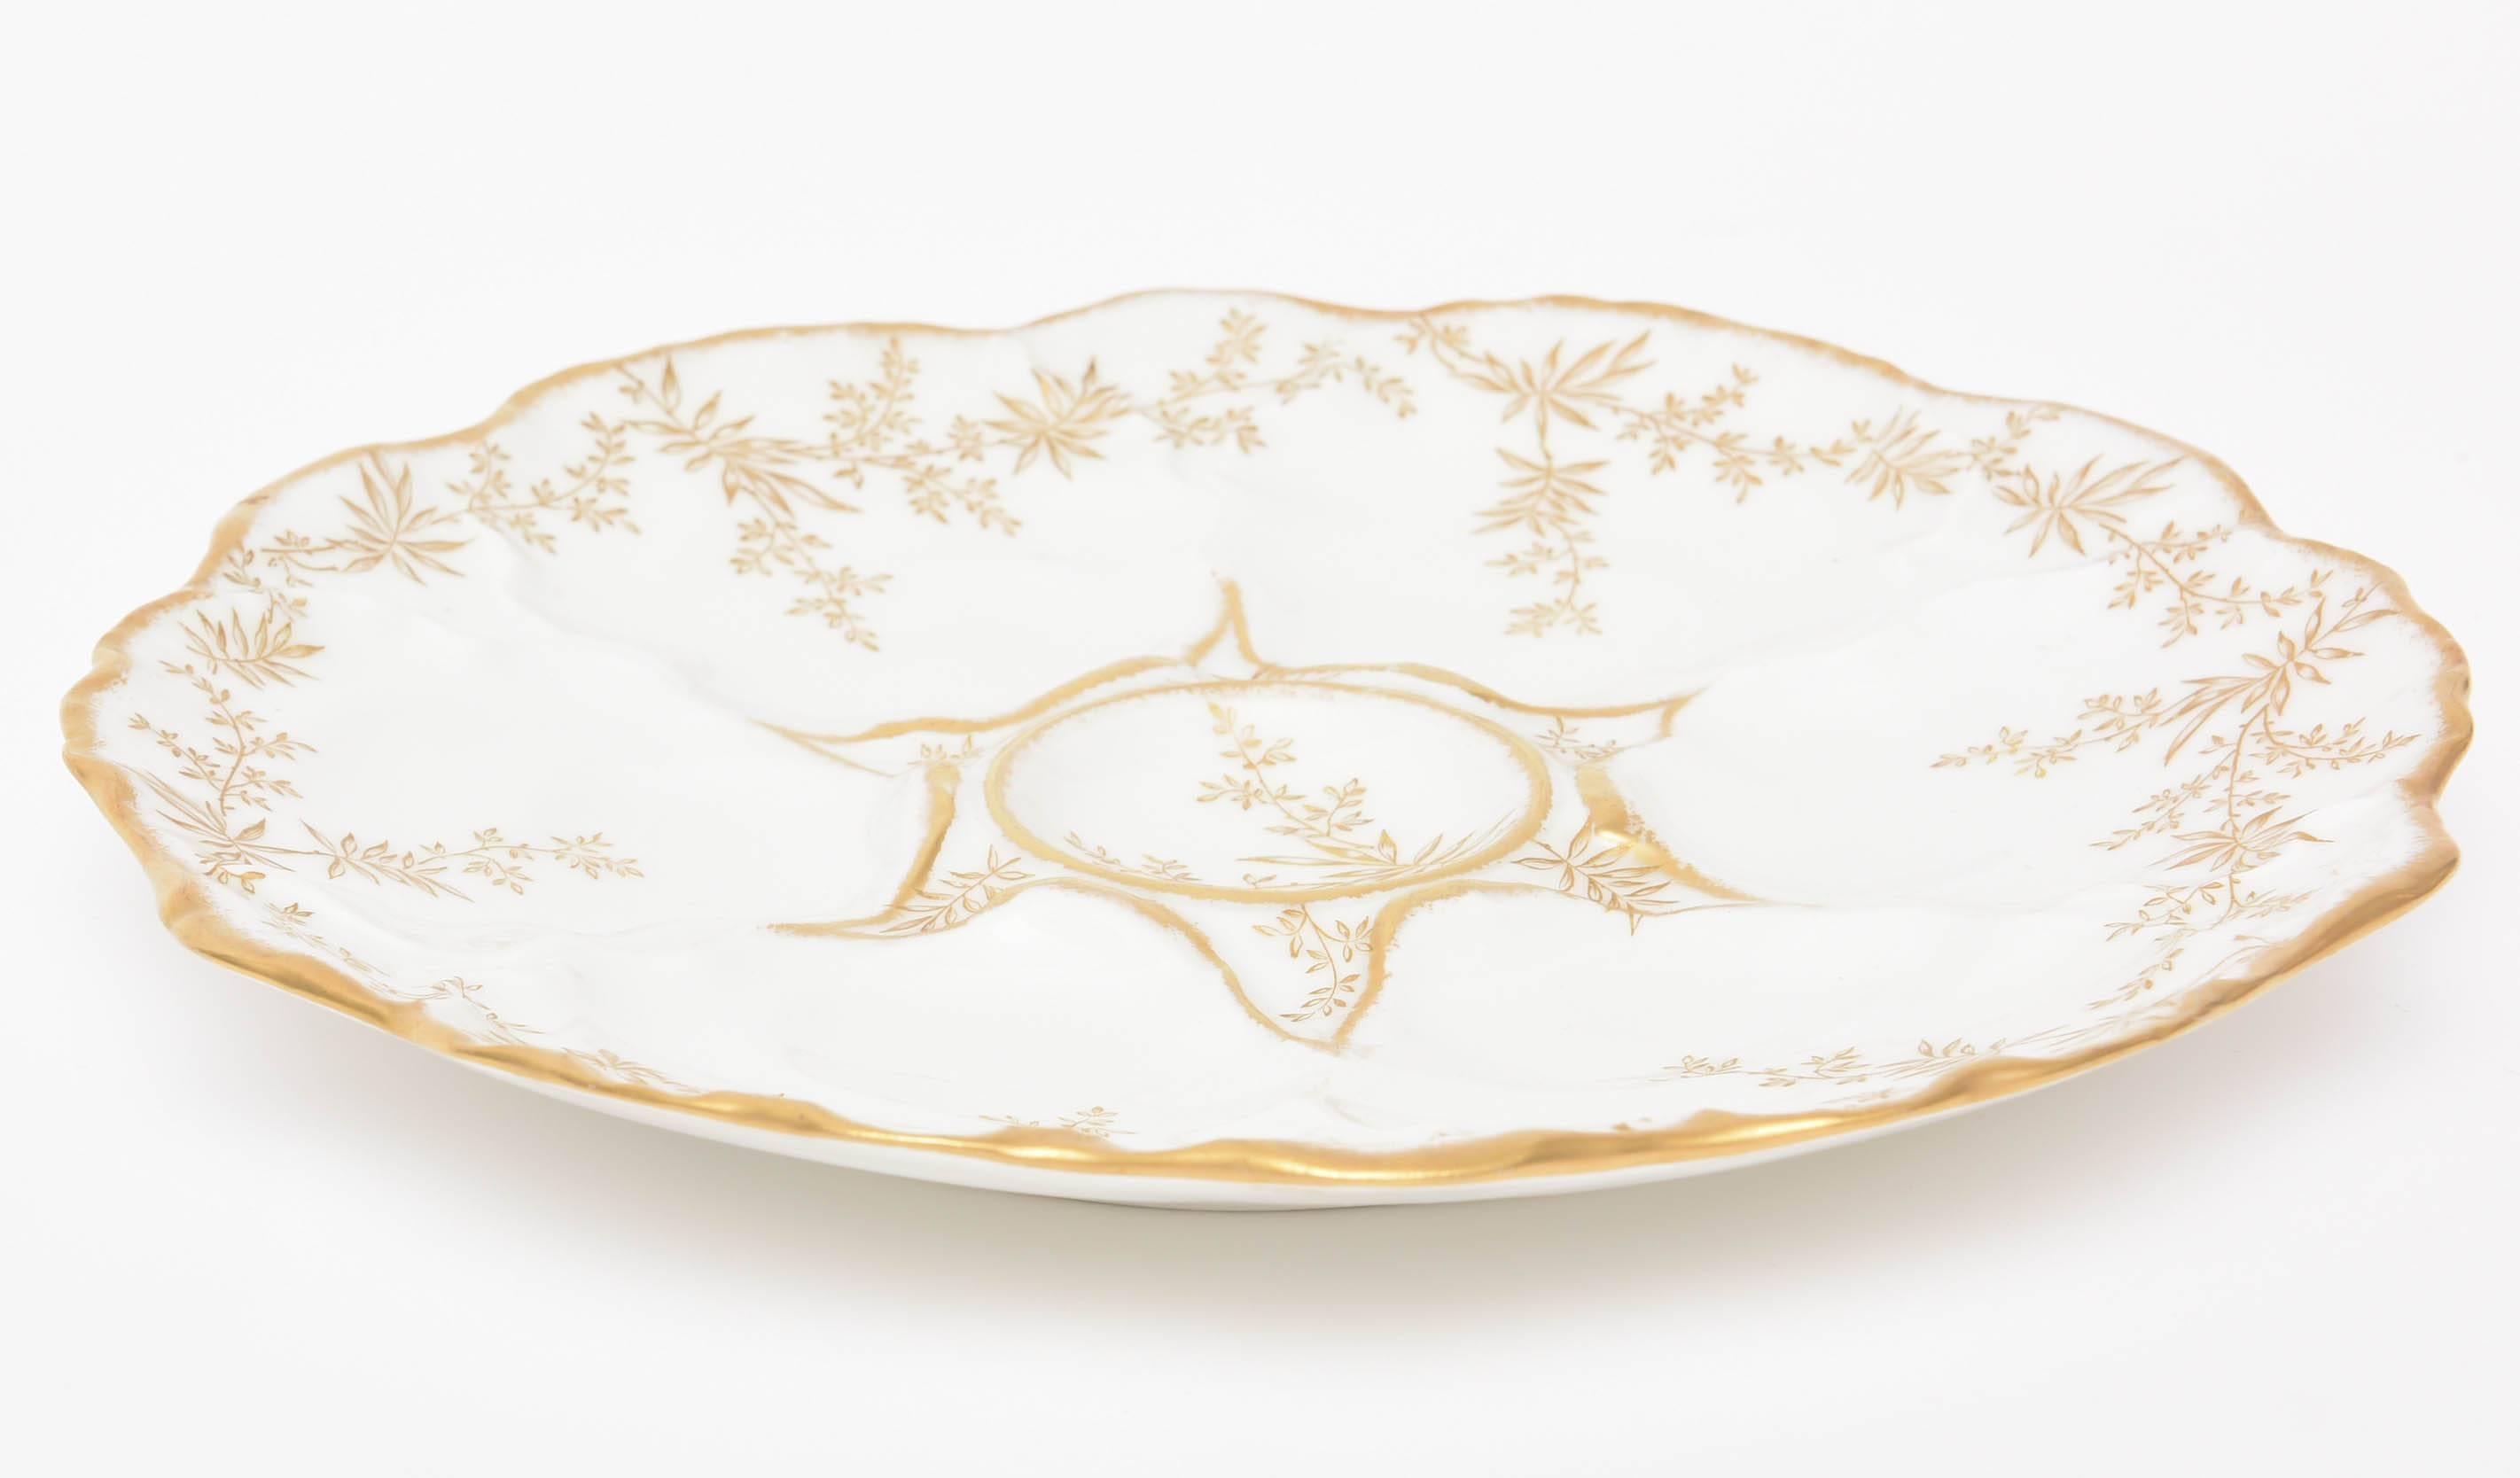 Late 19th Century Oyster Plate by Limoges France, Scalloped Shape and Hand-Painted Gold